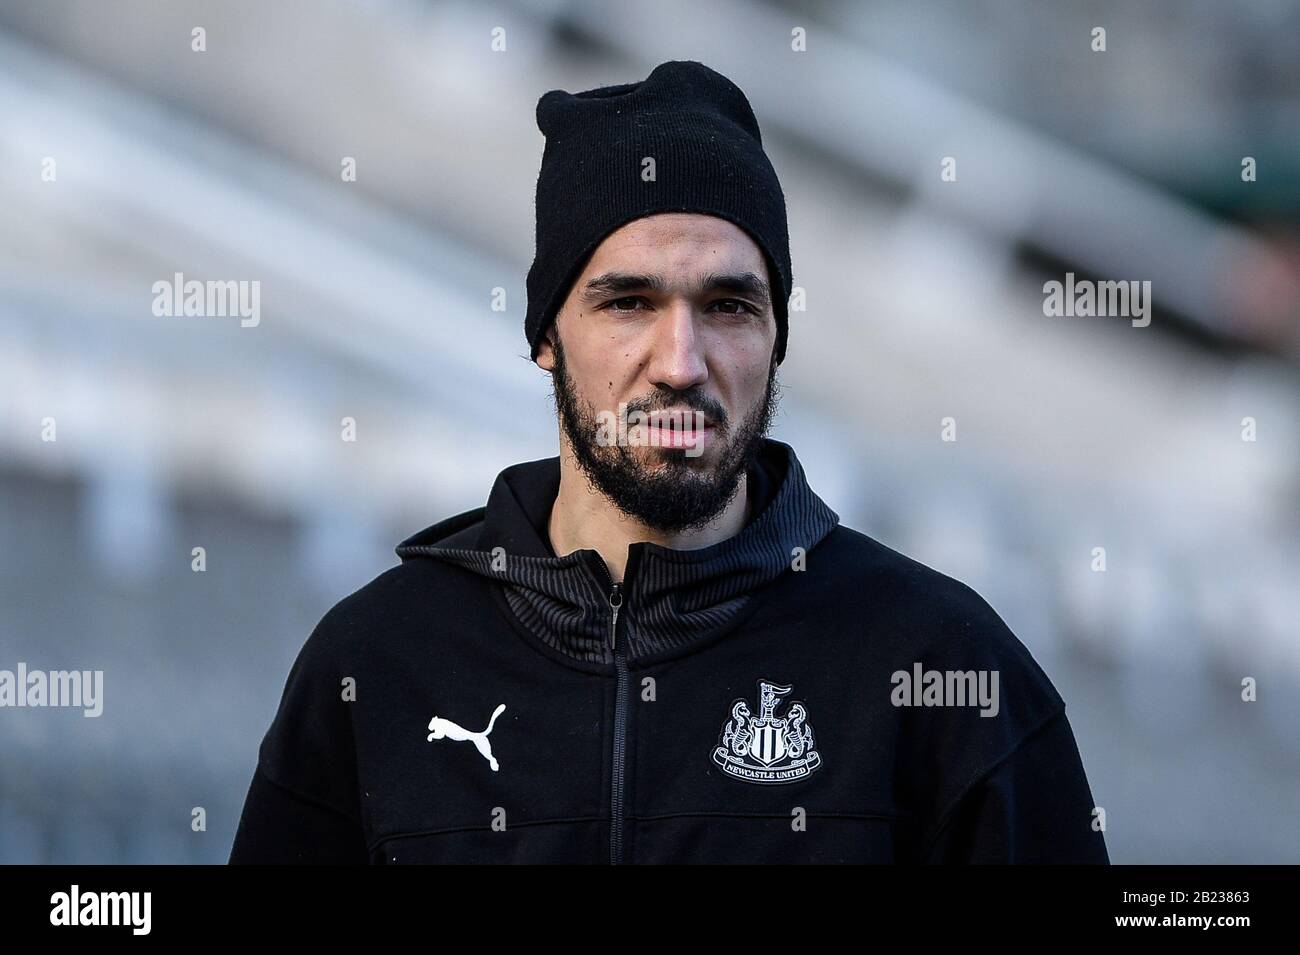 NEWCASTLE UPON TYNE, ENGLAND - FEBRUARY 29TH Nabil Bentaleb (42) of Newcastle United before the Premier League match between Newcastle United and Burnley at St. James's Park, Newcastle on Saturday 29th February 2020. (Credit: Iam Burn | MI News) Photograph may only be used for newspaper and/or magazine editorial purposes, license required for commercial use Credit: MI News & Sport /Alamy Live News Stock Photo